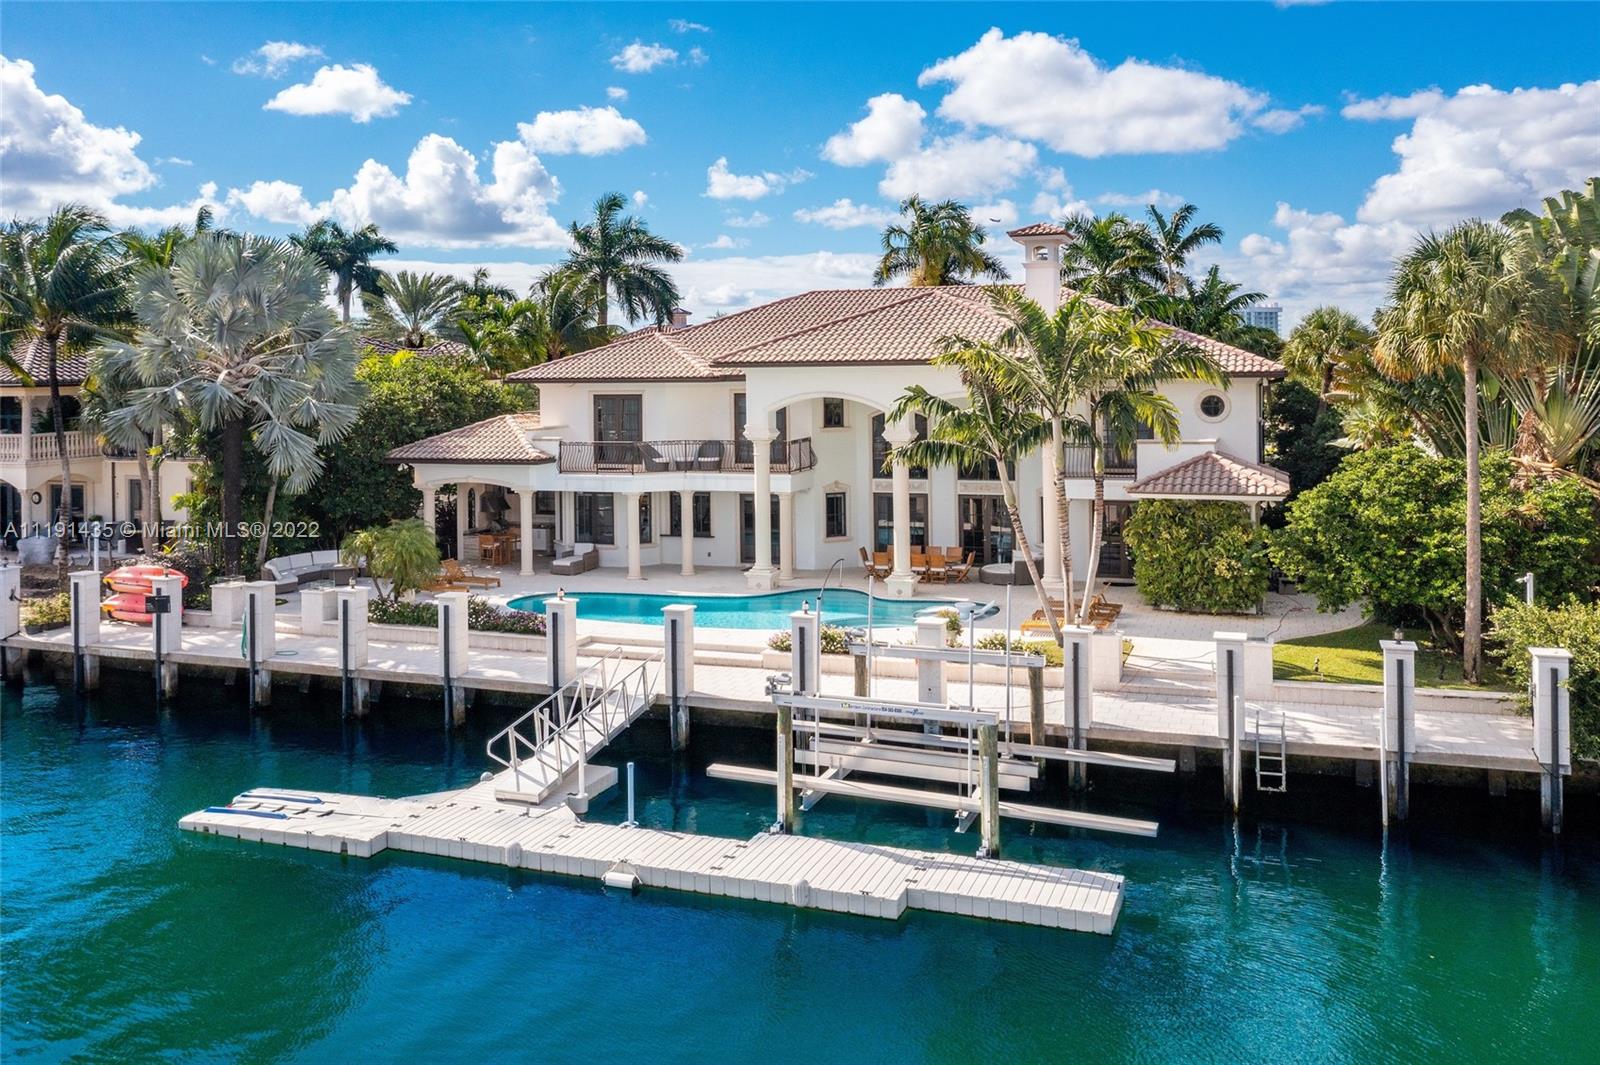 Embodying South Florida’s indoor-outdoor lifestyle, find yourself living in the very sought after Harbor Beach. This
7 bedroom, 6.5 bath home leaves no detail behind. Absorb bright blue waters with speeding wide water views on
120ft of water frontage. Only the best appliances which include Bosch, Thermador, SubZero, Pro fire Summer
kitchen and more. Never fail to impress guests with 500 bottle wine cellar, 4 fire pits, Finlandia sauna and Sonos
sound system throughout entire home. Enjoy all that this home has to offer yet remain in the most private cul de
sac in the neighborhood.